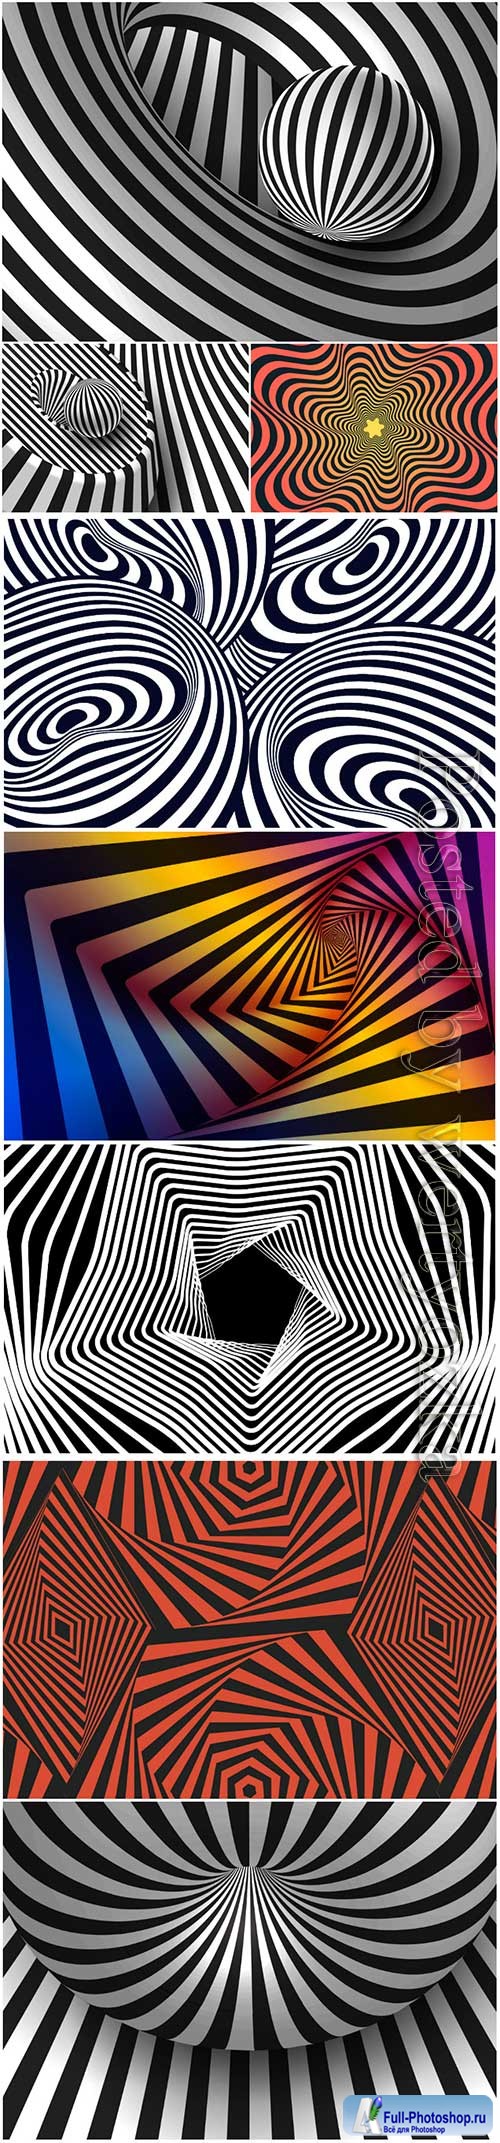 Psychedelic optical illusion vector background # 9